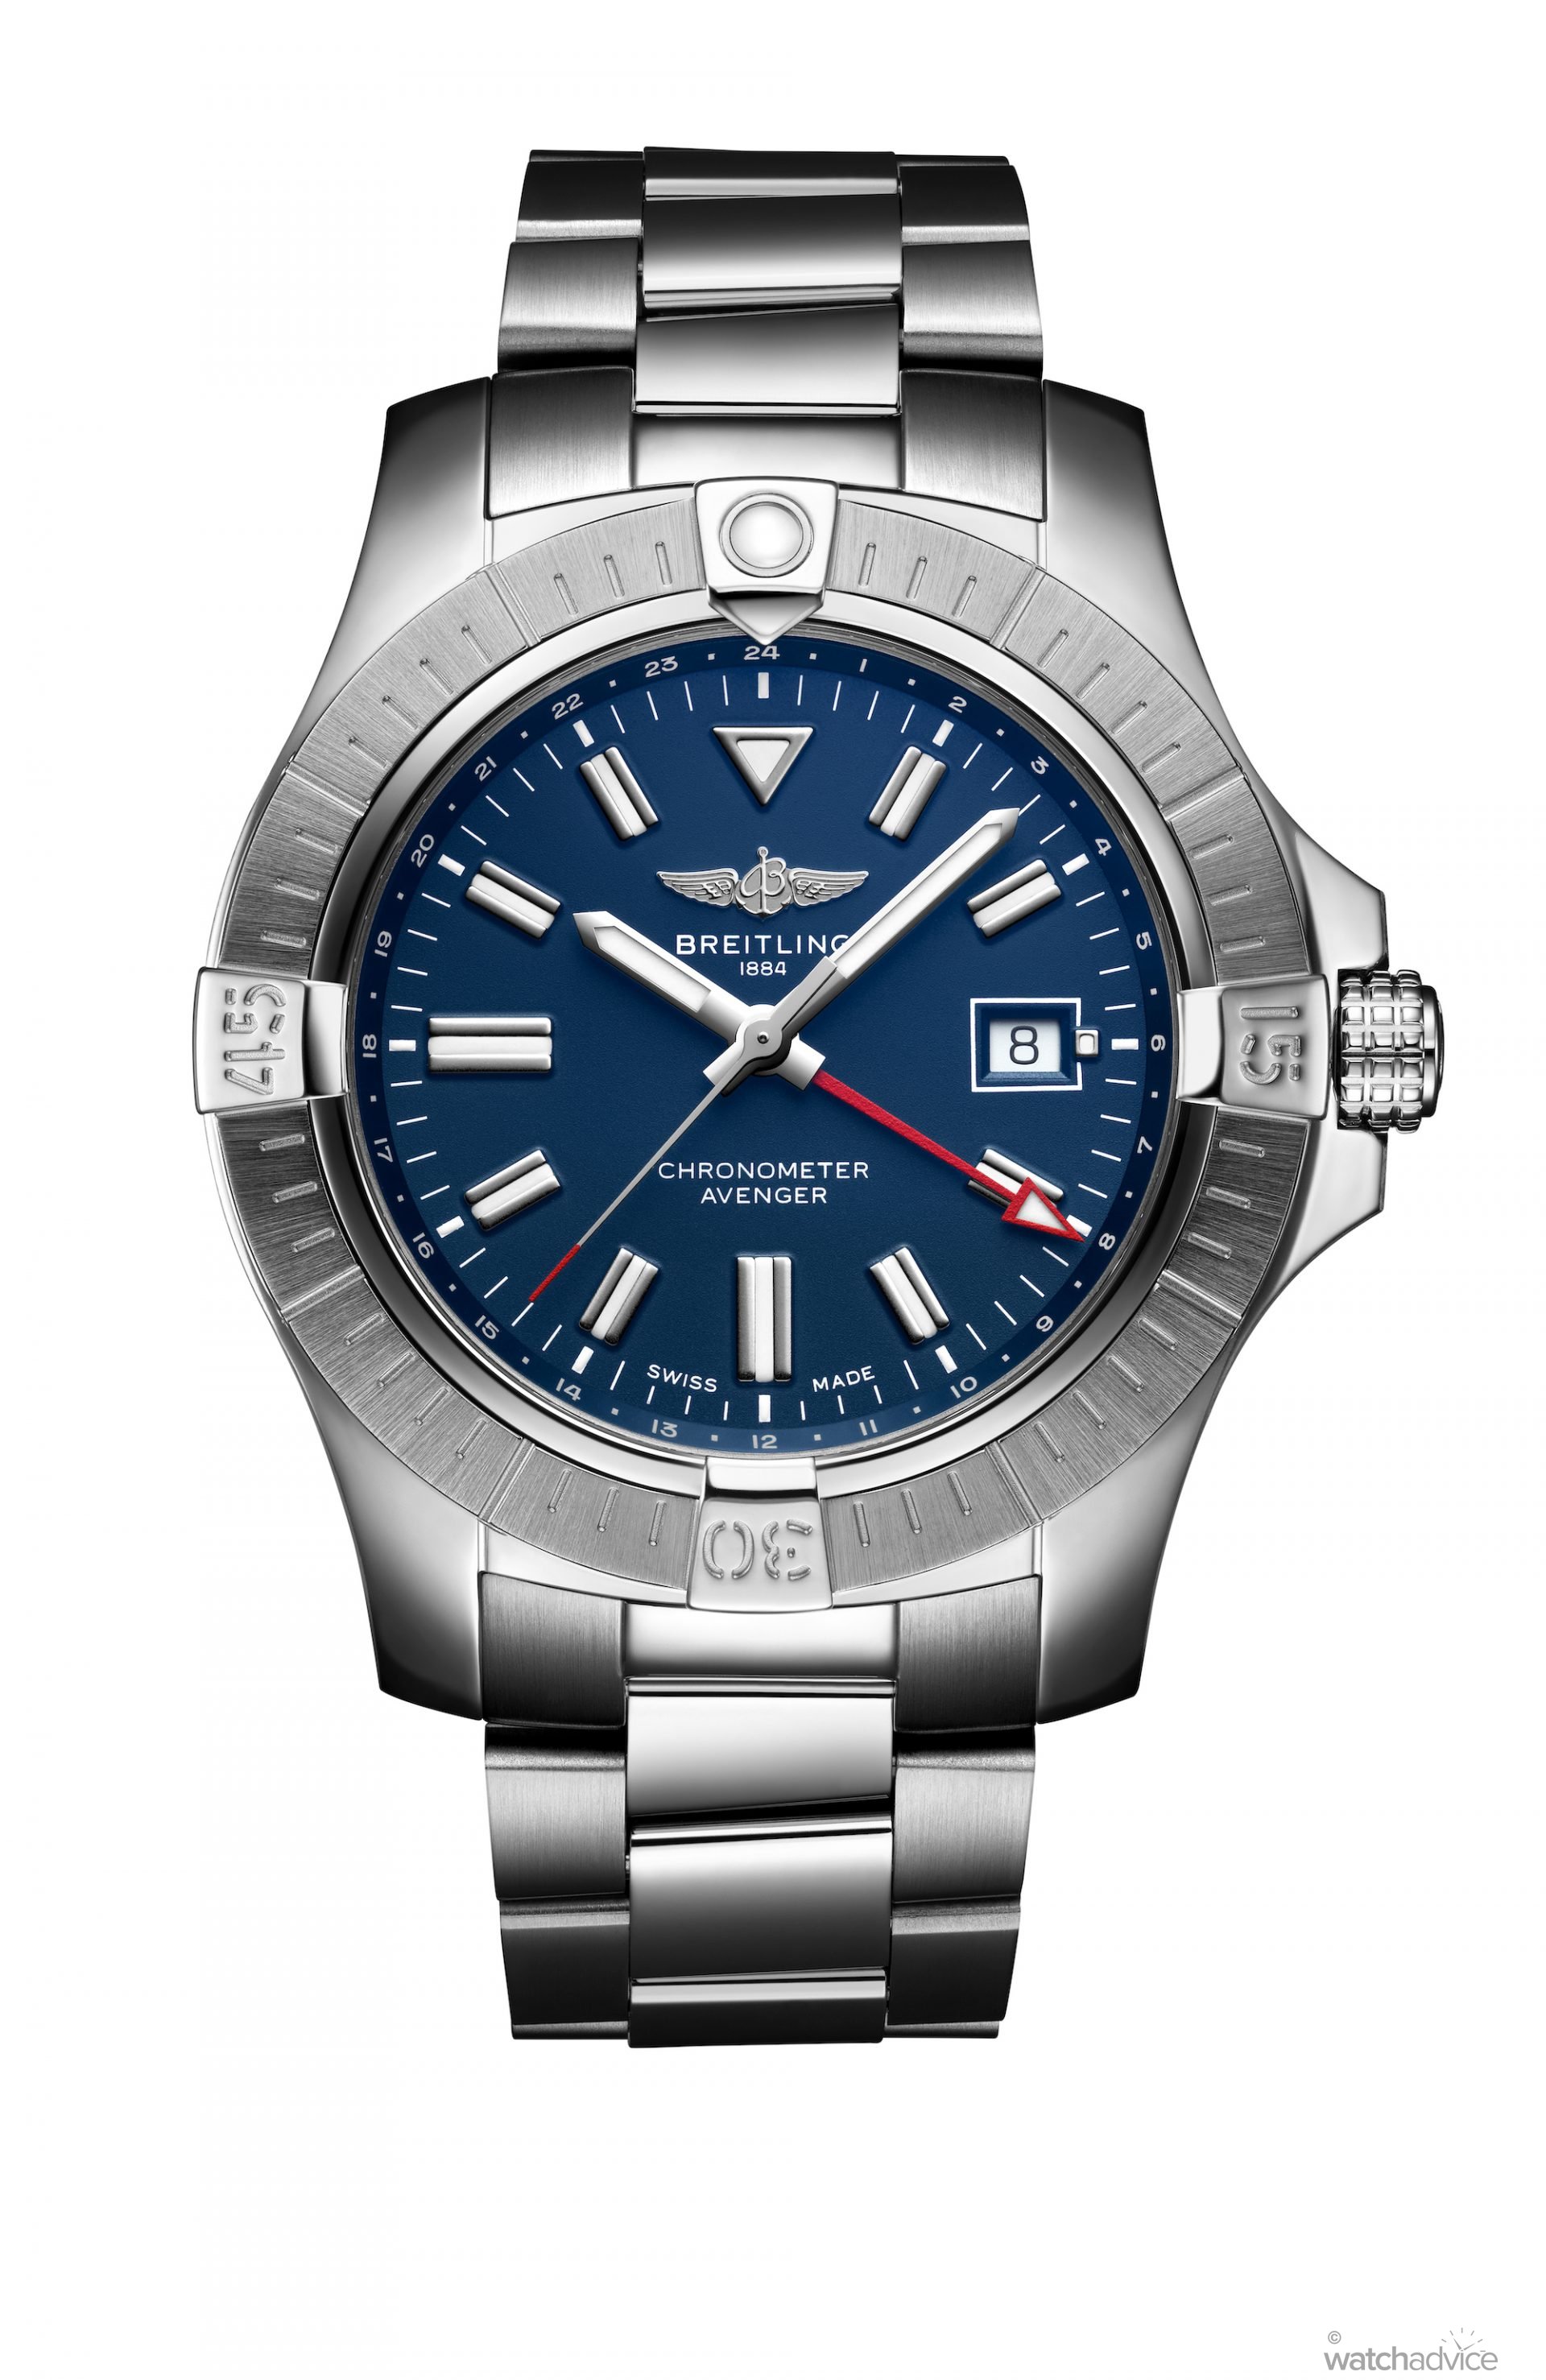 All new Breitling Avenger Collection – Watch Advice